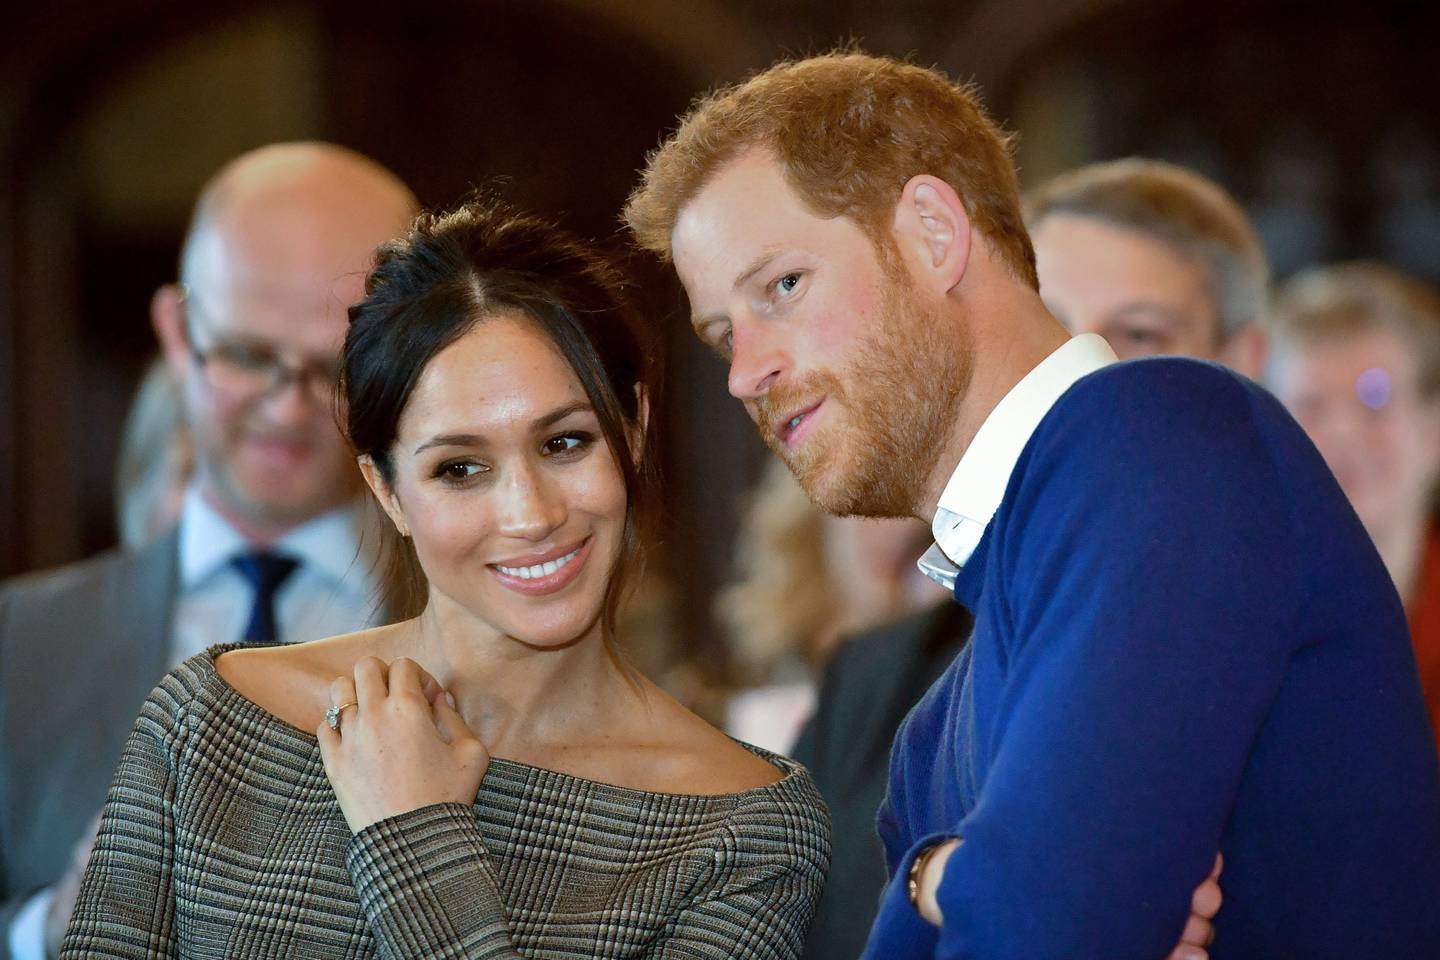 (FILES) In this file photo taken on January 18, 2018 Britain's Prince Harry and his fiancée US actress Meghan Markle watch a dance performance by Jukebox Collective during a visit at Cardiff Castle in Cardiff, south Wales on January 18, 2018, for a day showcasing the rich culture and heritage of Wales. Meghan Markle once struggled for roles but the US actress has now landed the biggest part of all as she prepares to marry Prince Harry on May 19, 2018 and become the newest face in Britain's royal family. / AFP / POOL / Ben Birchall
